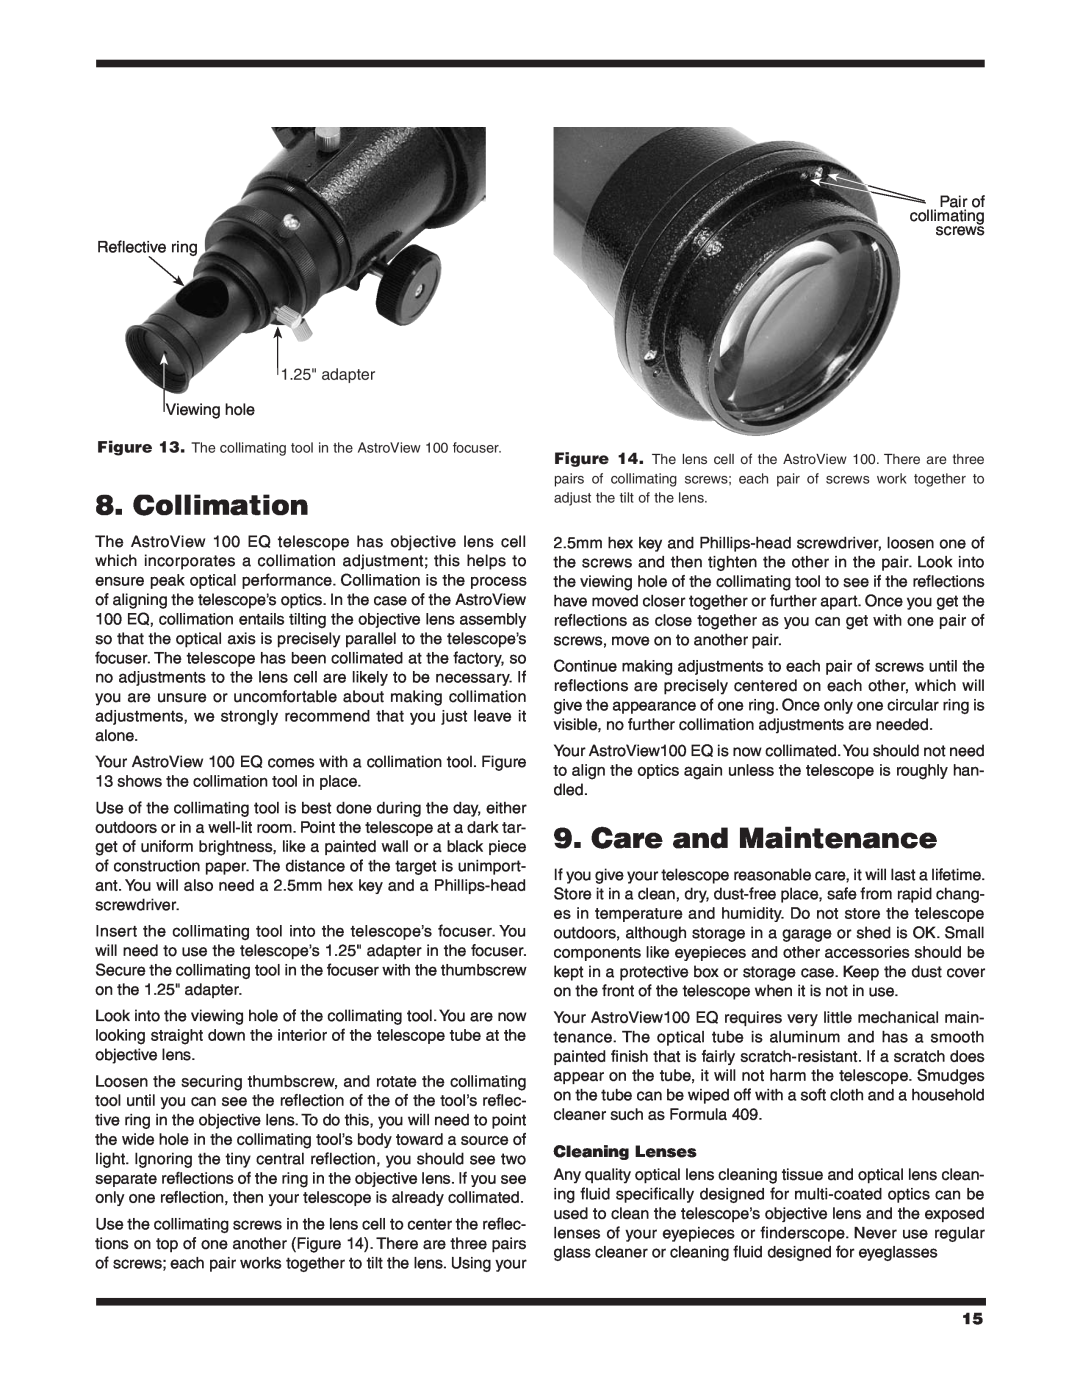 Orion 9862 instruction manual Collimation, Care and Maintenance, Cleaning Lenses 